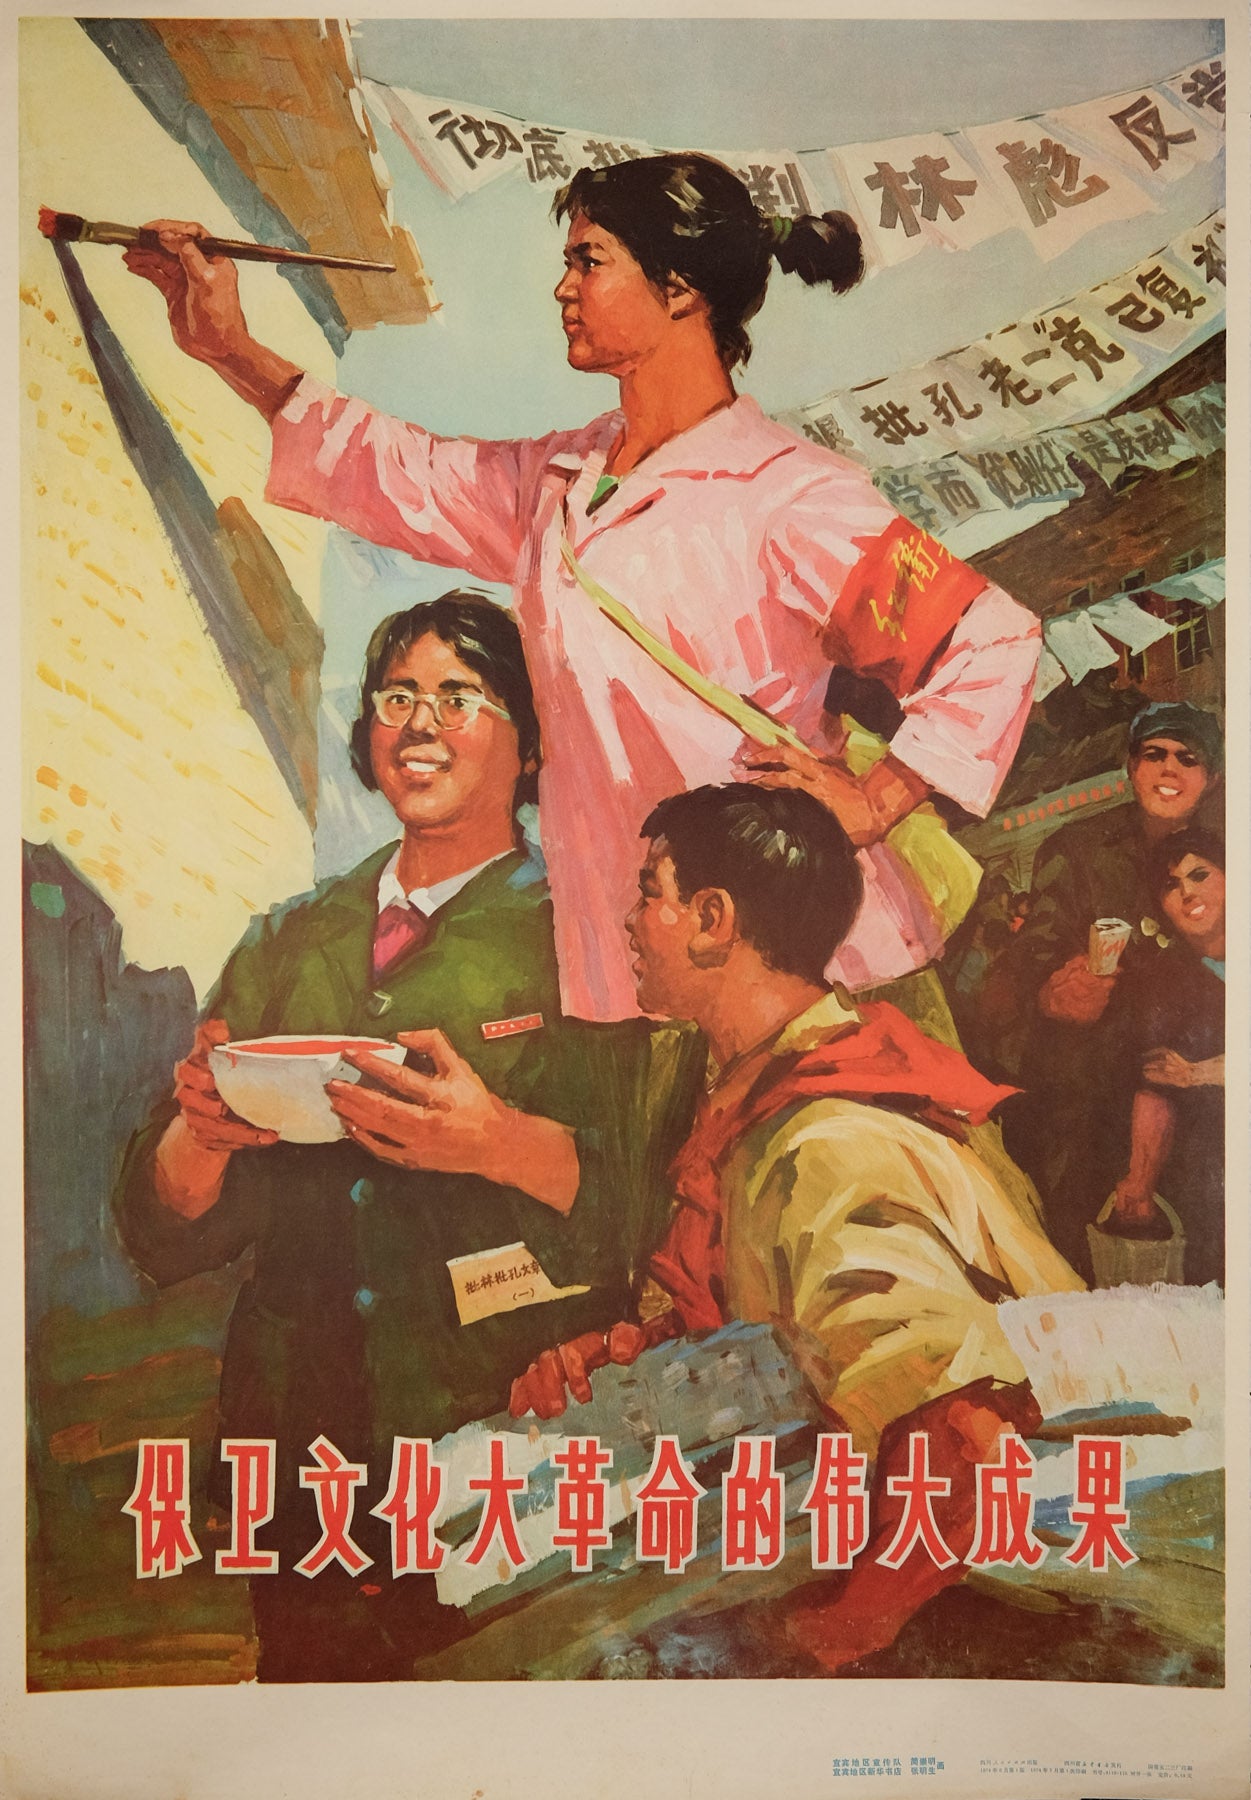 original vintage 1974 Chinese communist propaganda poster Safeguard the mighty achievements of the Cultural Revolution by Jian Chongming and Zhang Mingsheng